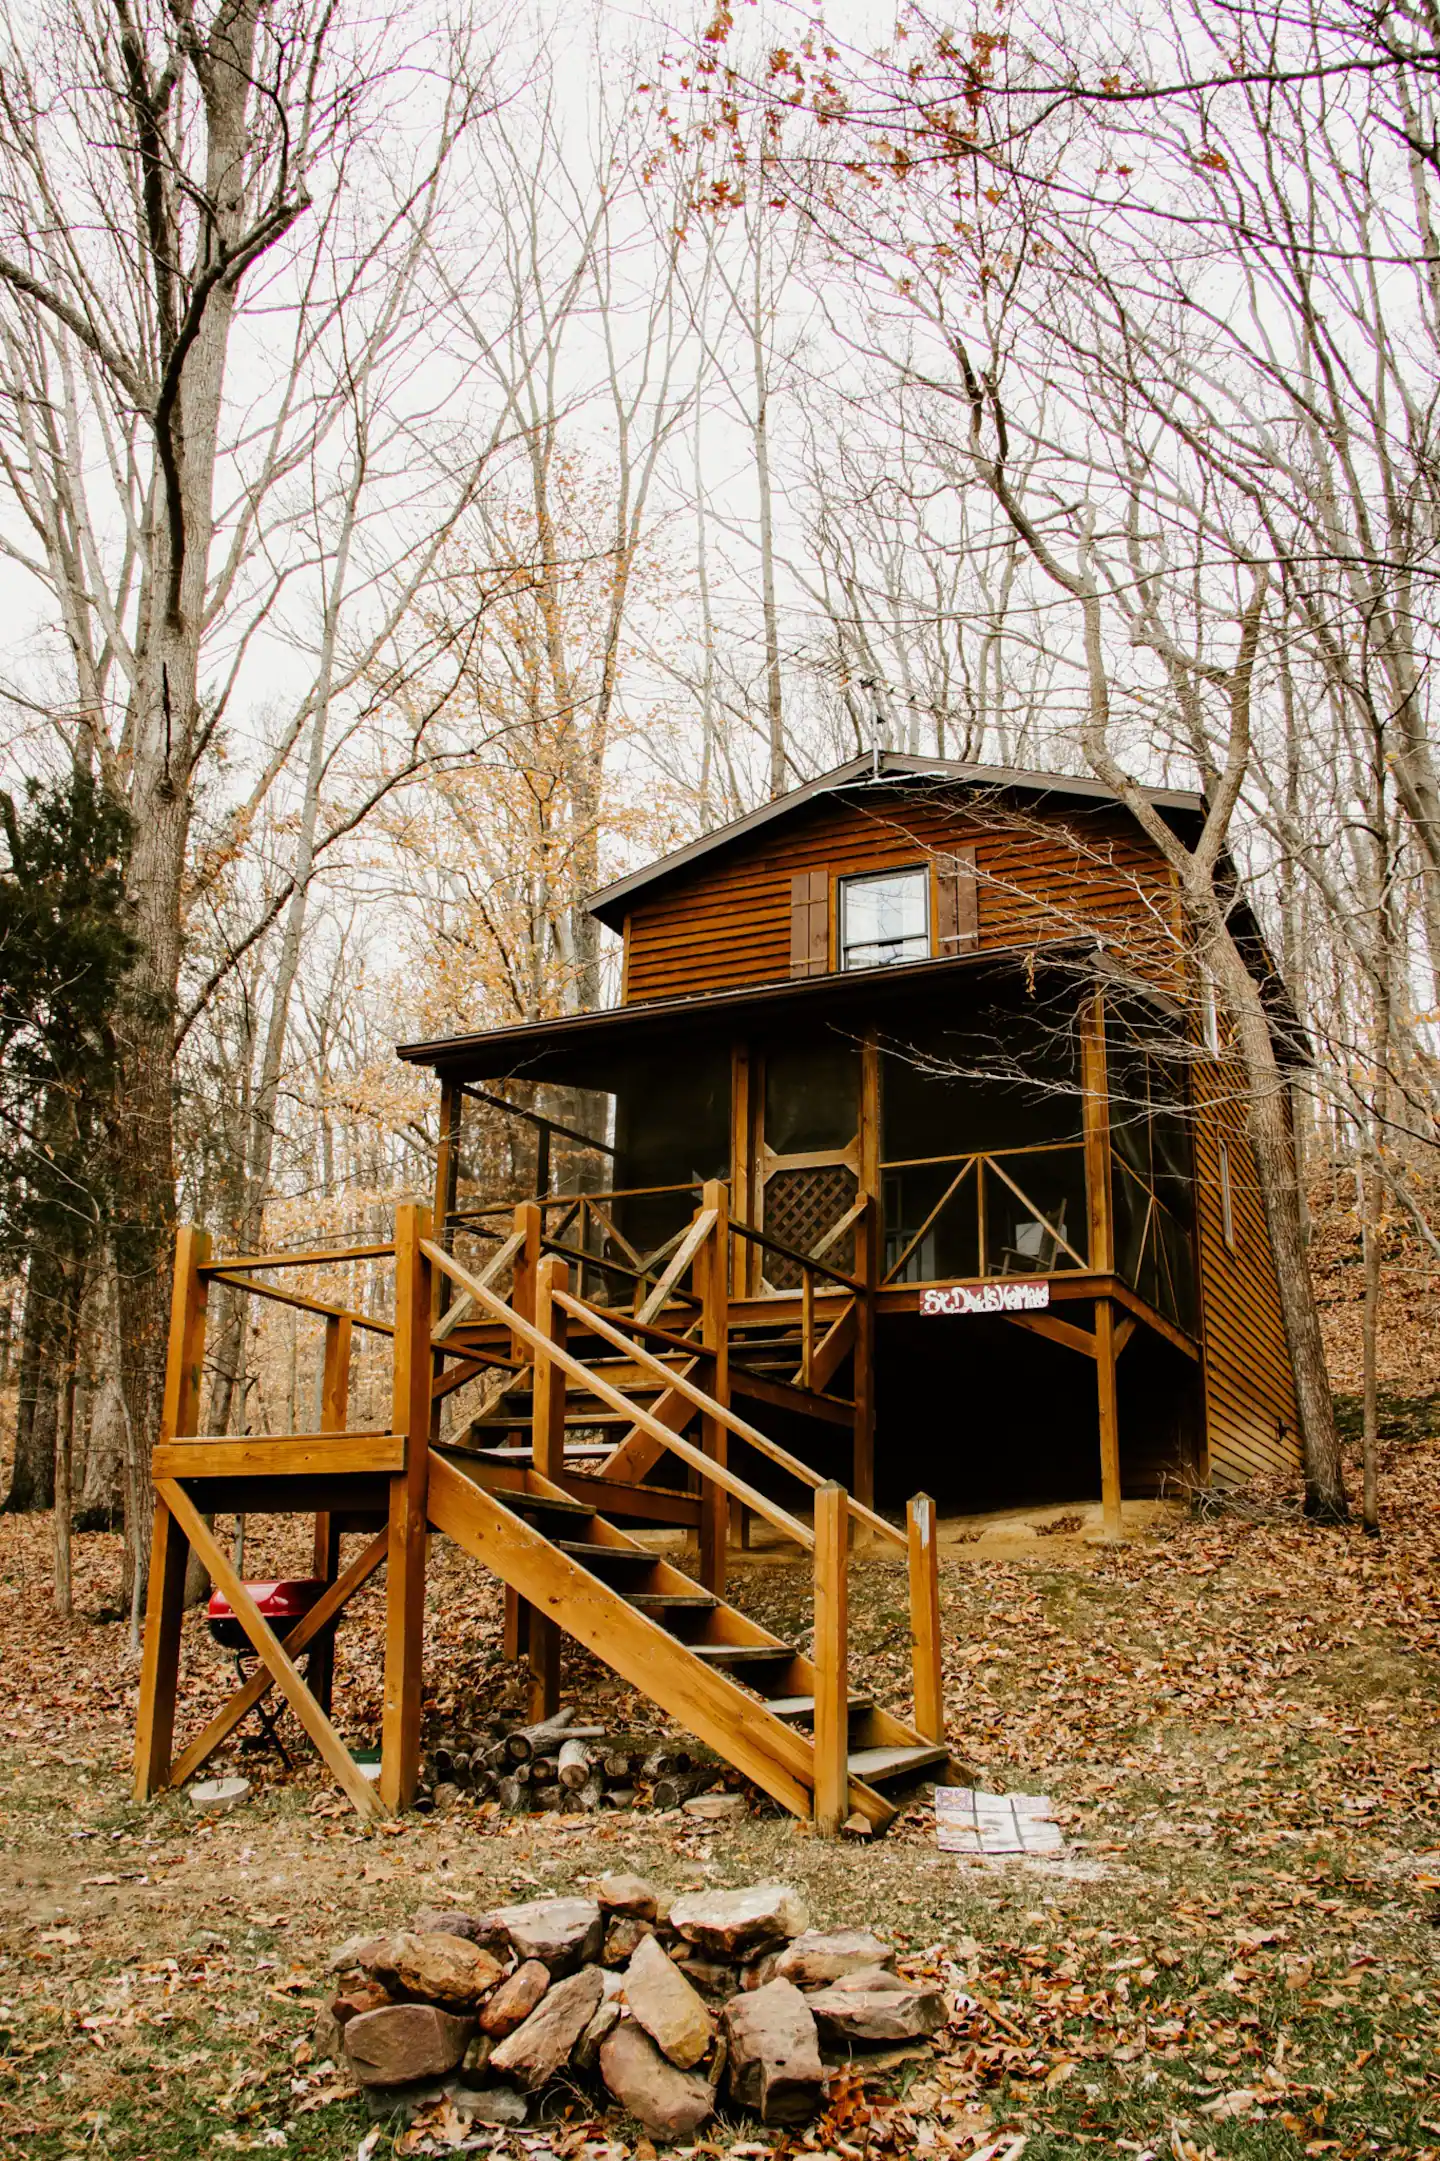 New Leaf Treehouse in Indiana